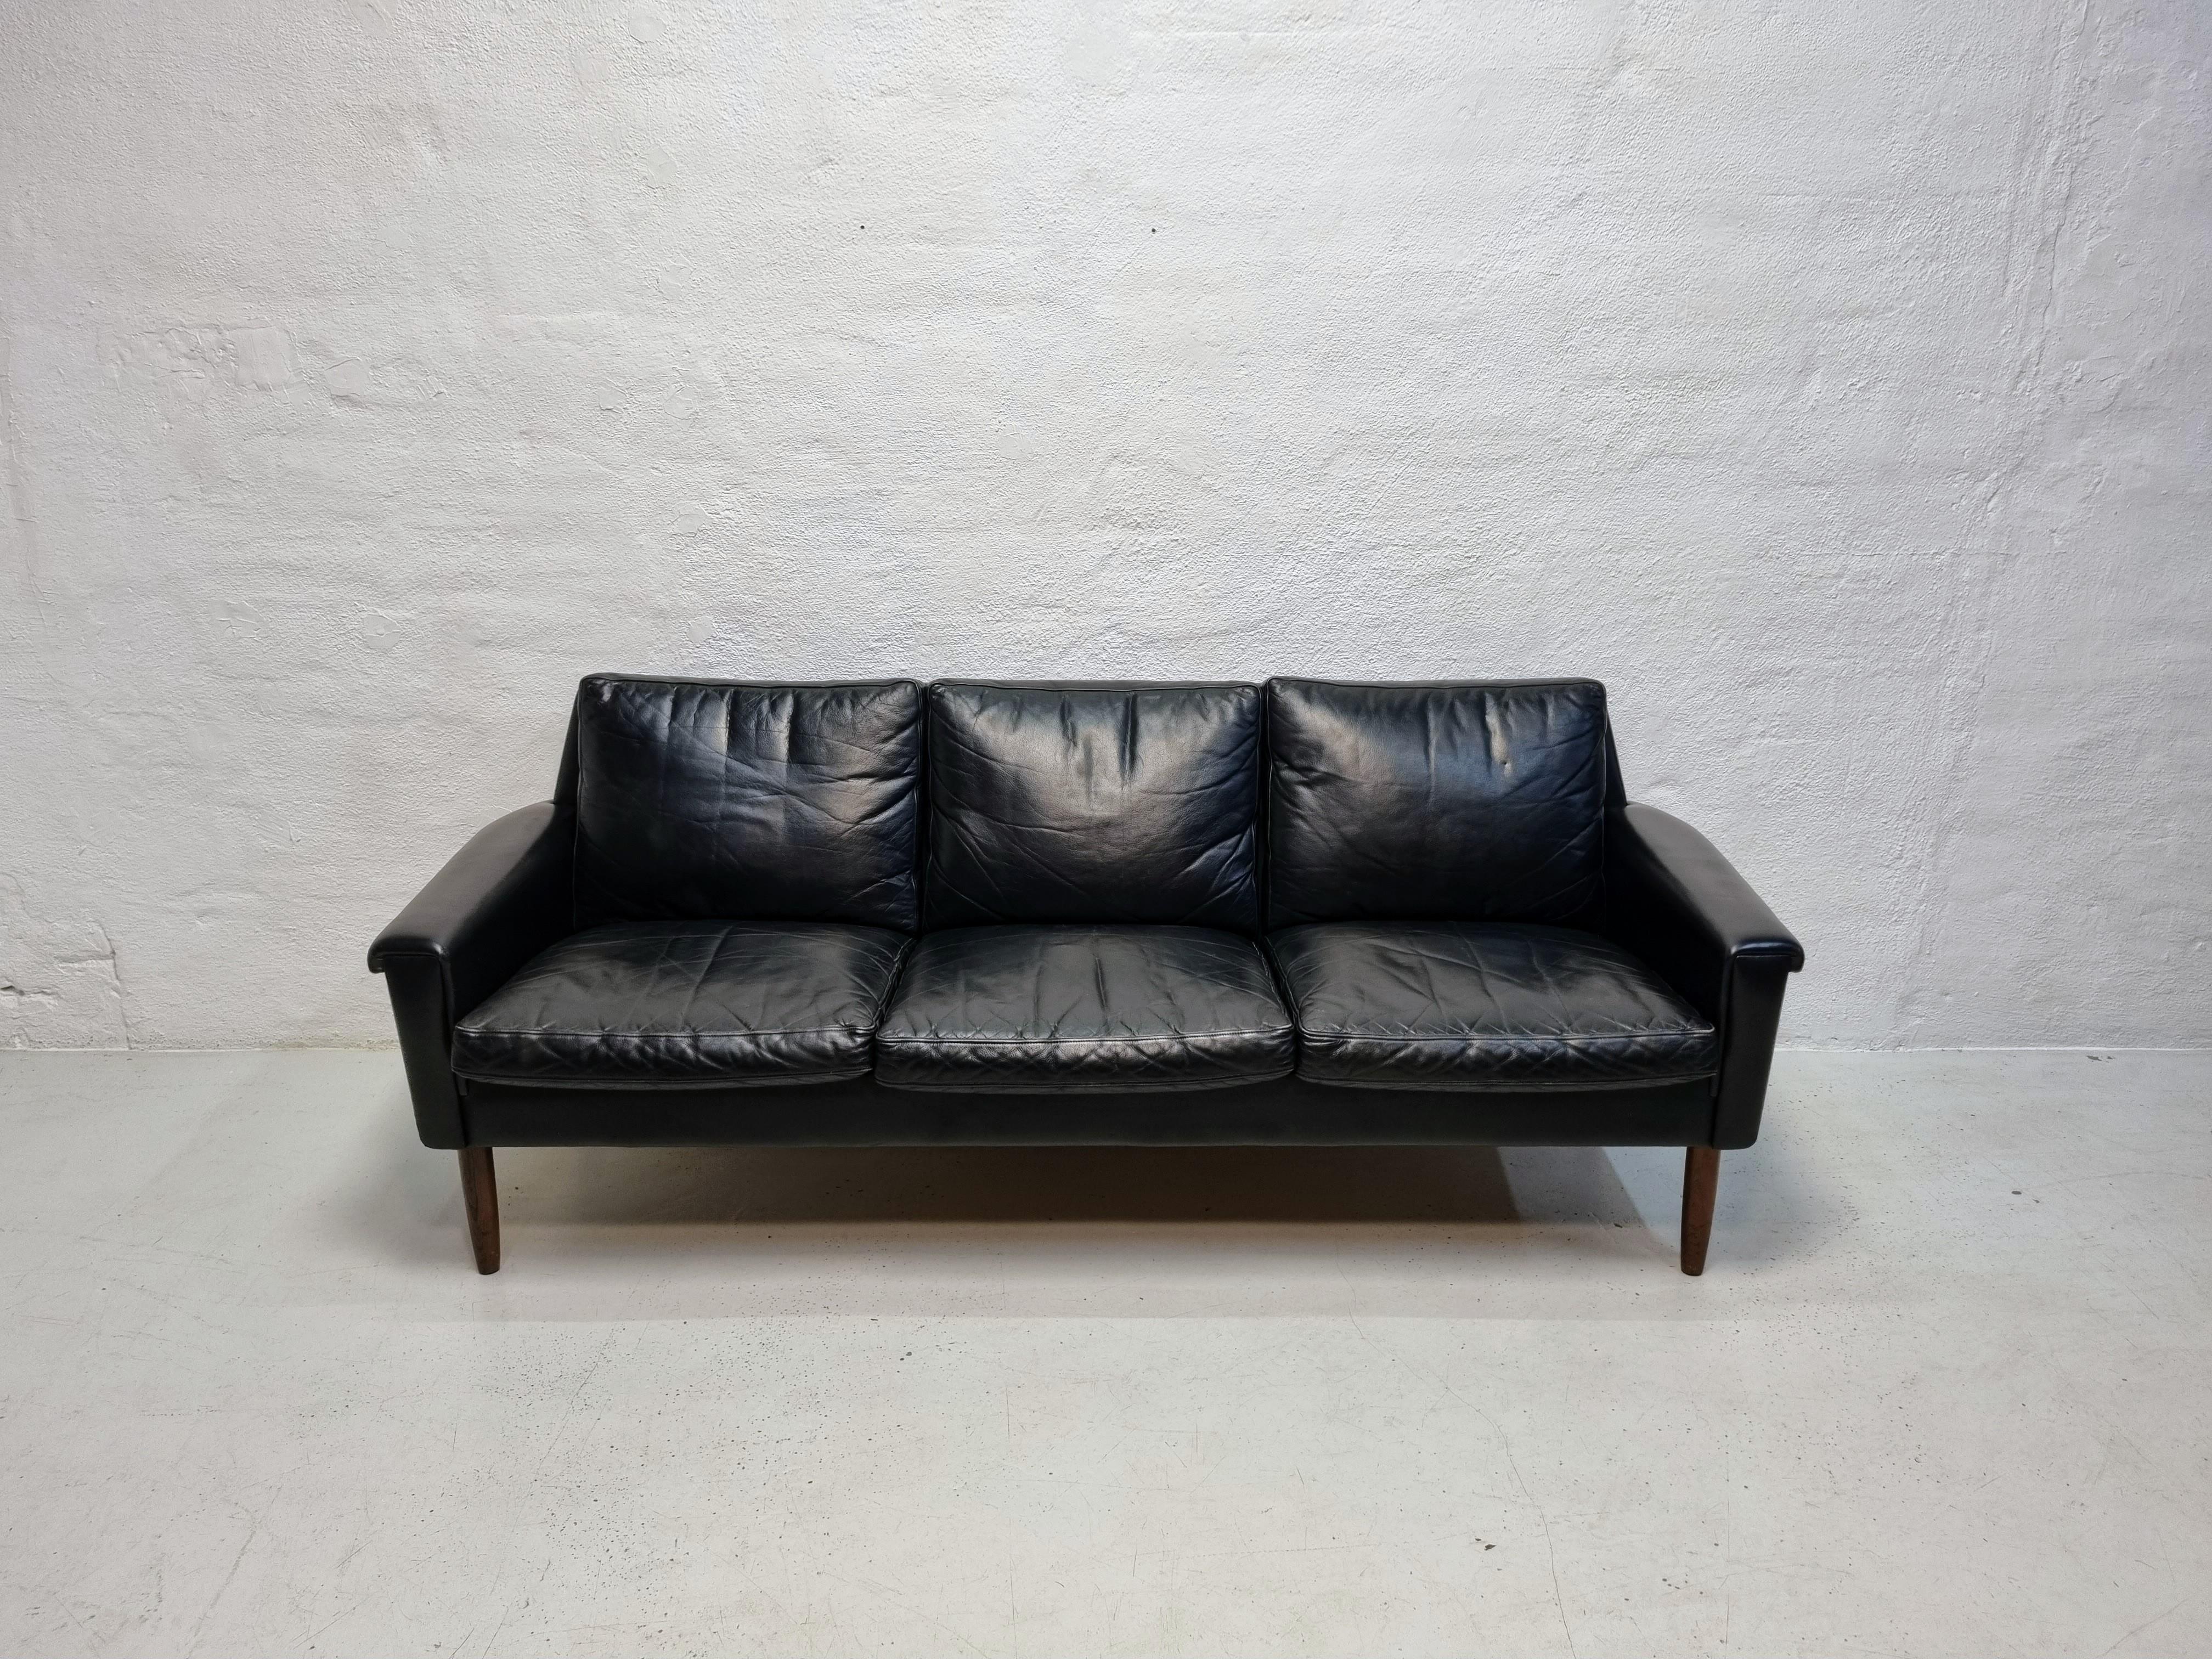 Black leather sofa on rosewood legs, 3 seater.
The sofa is attributed to Georg Thams and produced by Vejen møbelfabrik.
A nice and stylish sofa with very good sitting comfort.